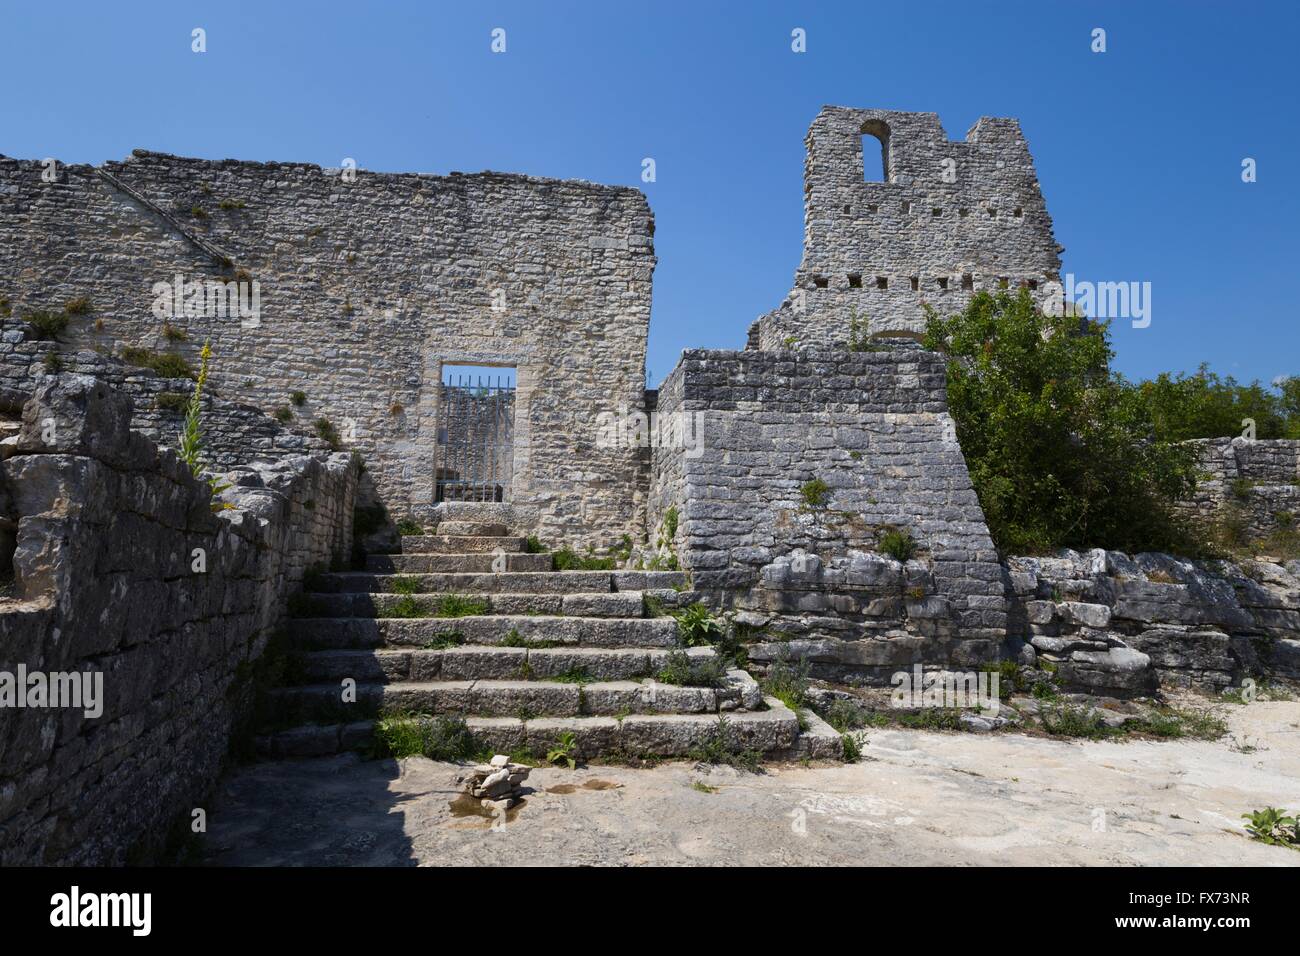 Remains of medieval town Dvigrad in Istria, Croatia Stock Photo